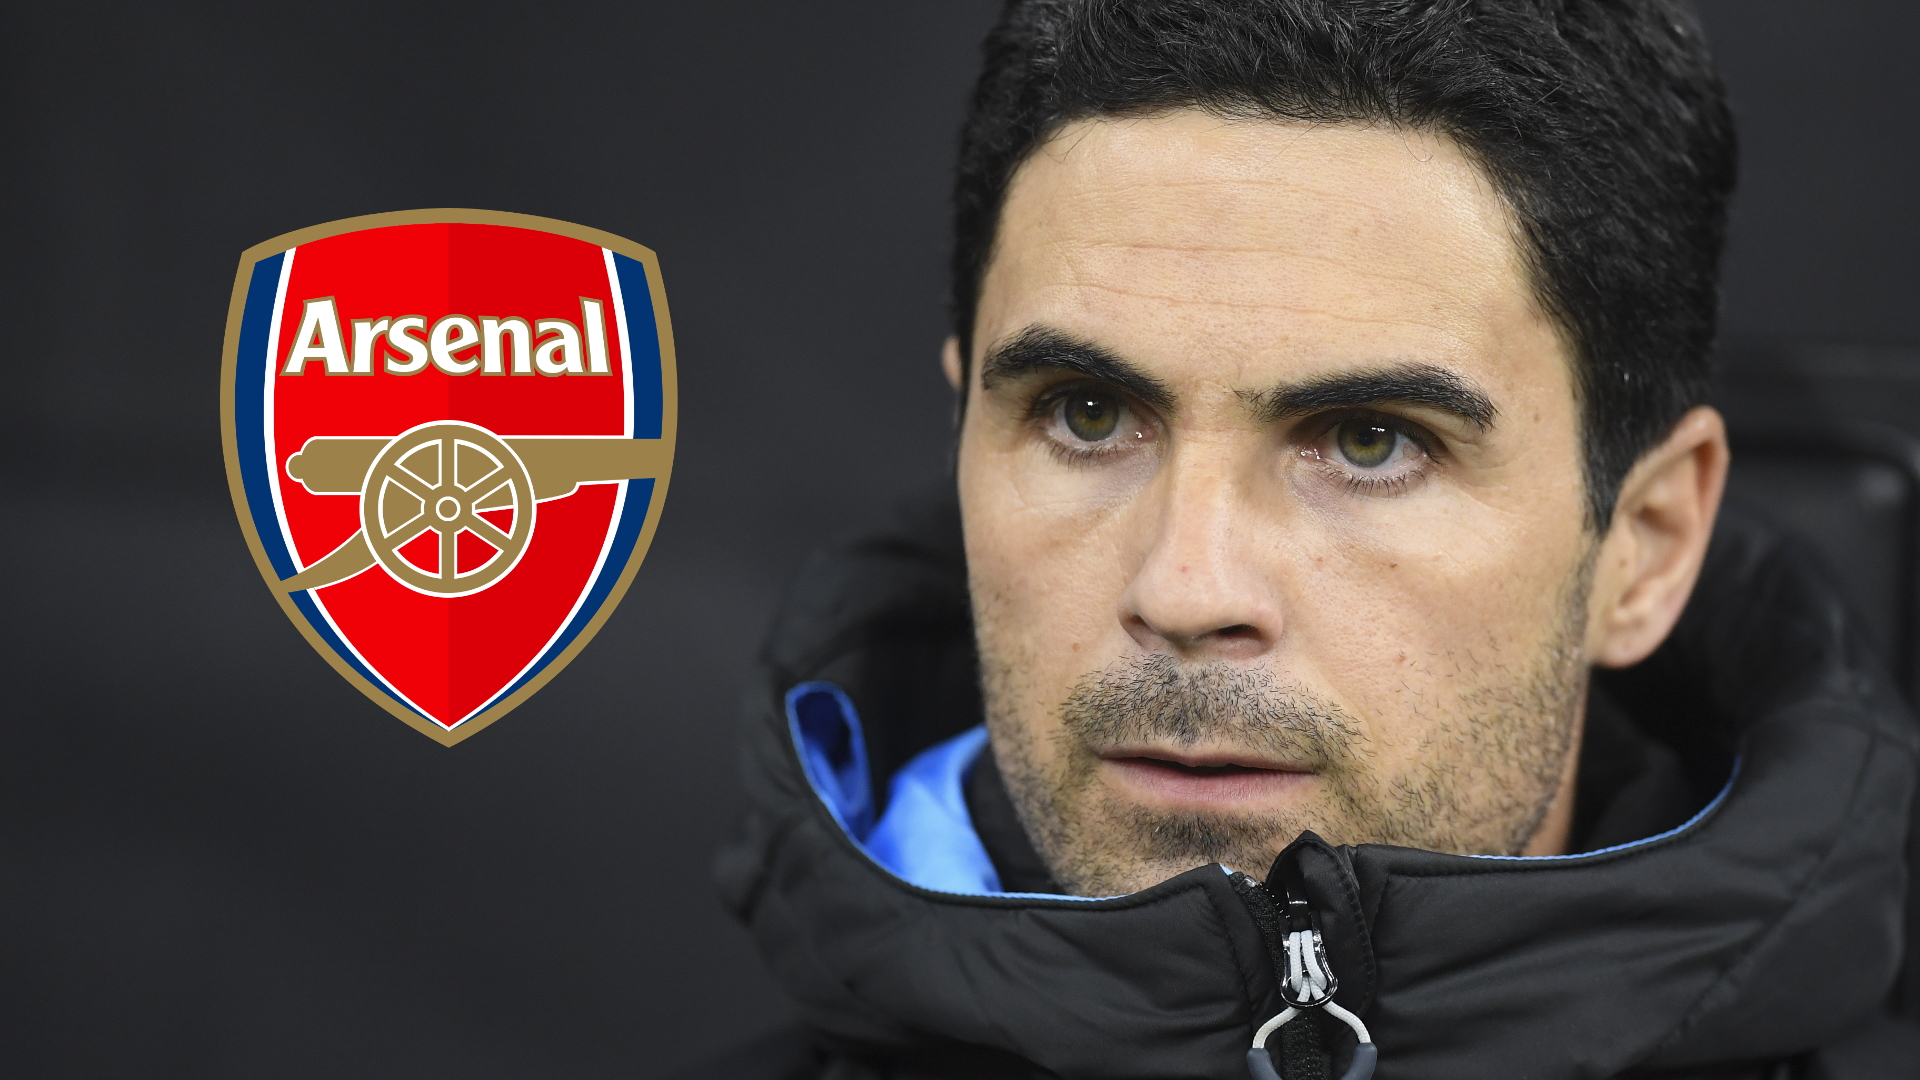 ‘Other than knowing where training ground is, what does Arteta bring?’ - Merson sees ‘clueless’ Arsenal board taking ‘big gamble’